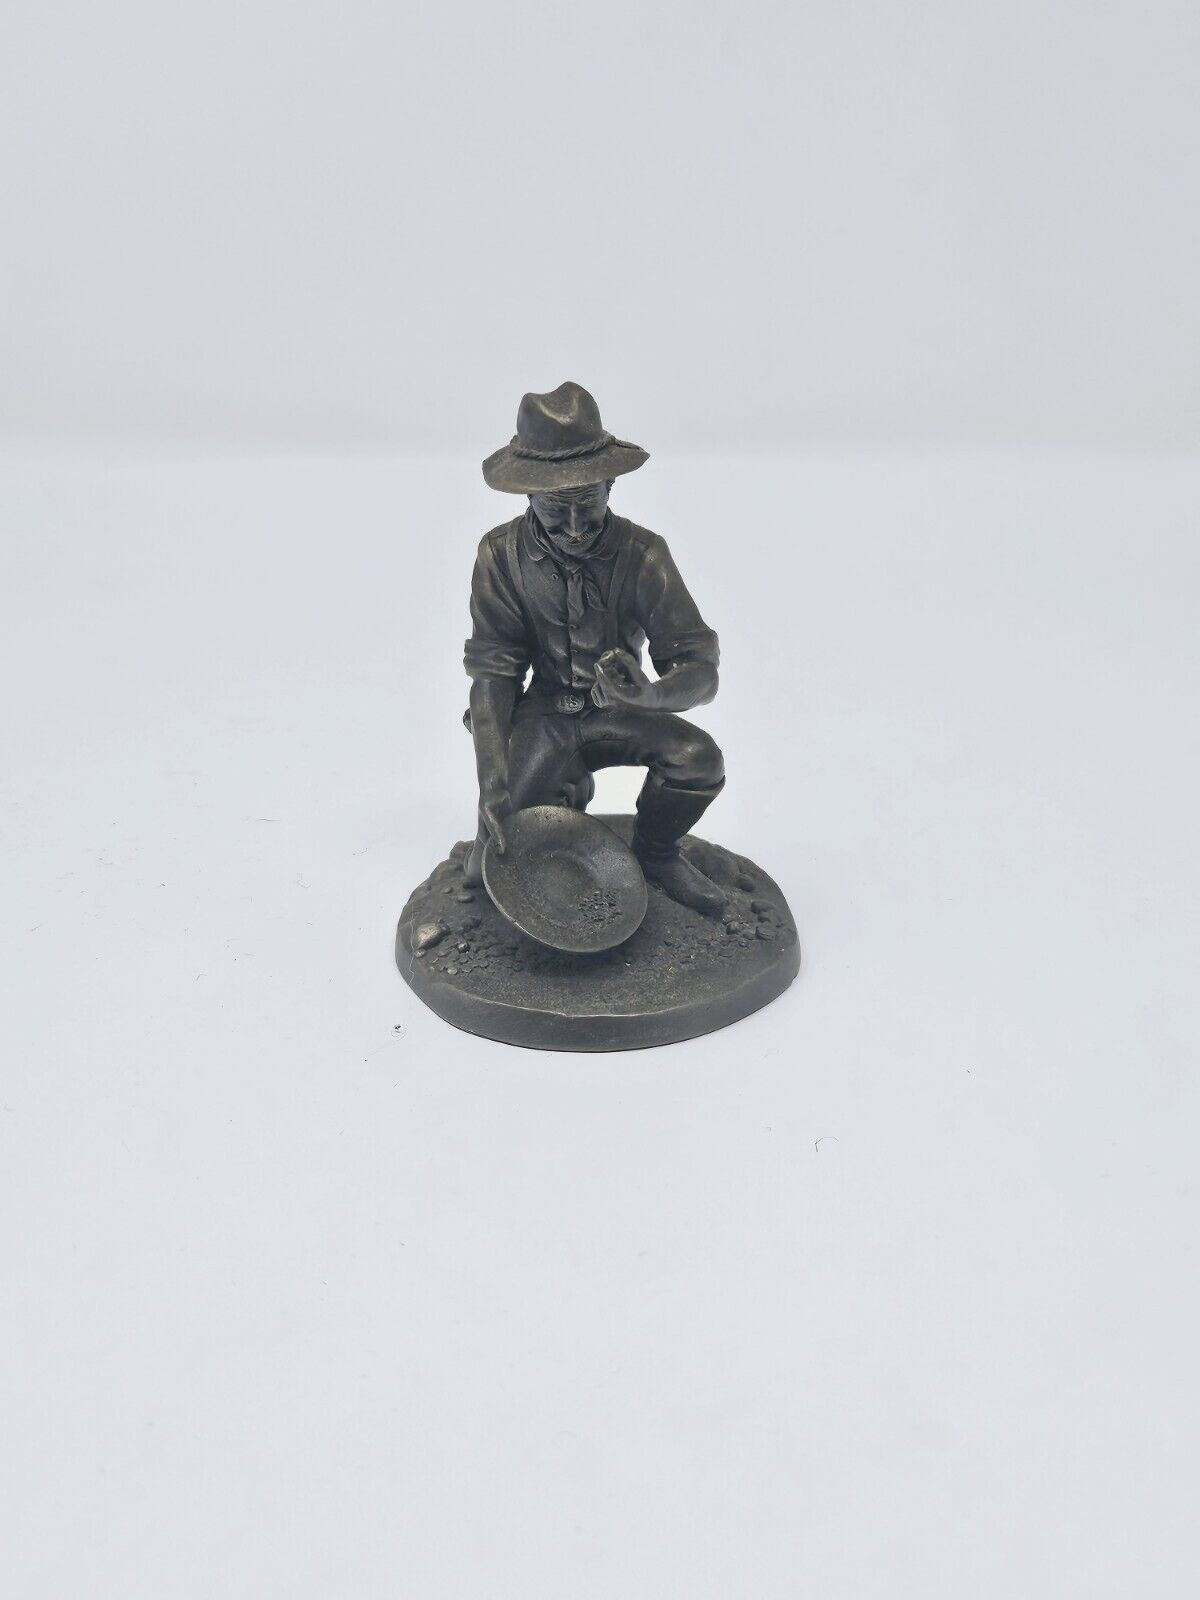 THE FRANKLIN MINT 1974 Fine Pewter Collection “The Prospector” 1836-1855